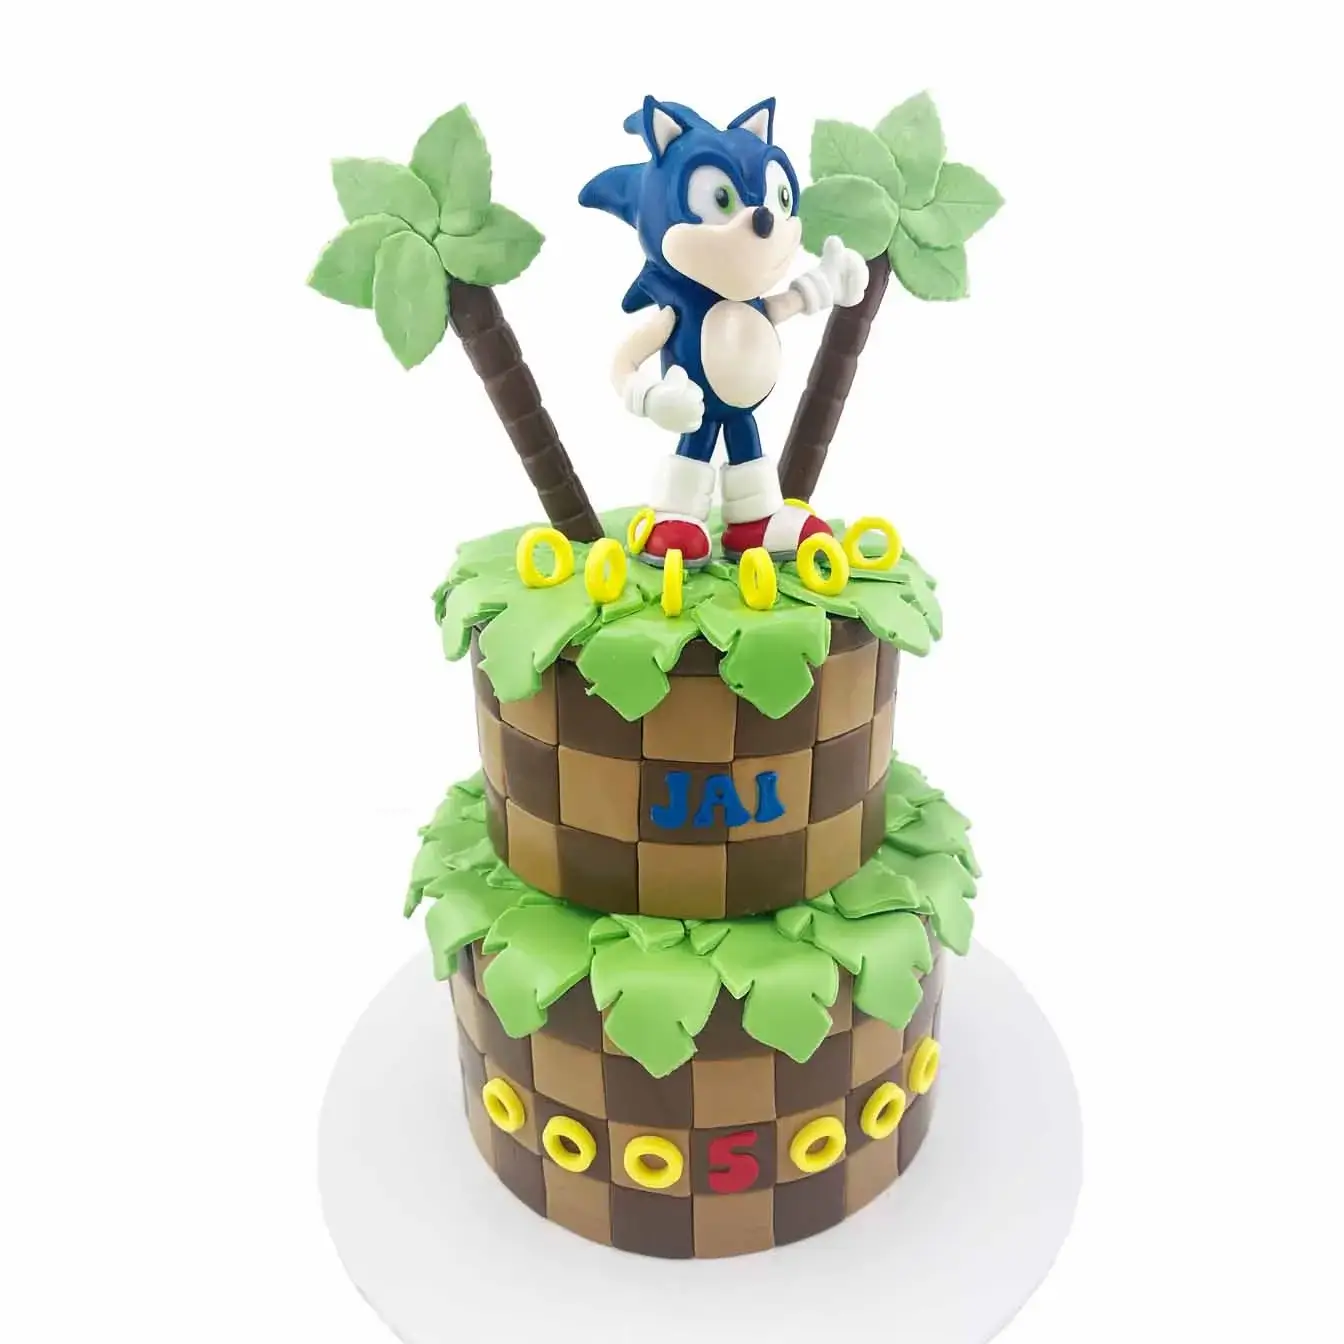 Sonic Adventure Cake - A two-tier cake with molded Sonic, brown checkers, and two palm trees, a thrilling centerpiece for gamers and fans of the blue blur.